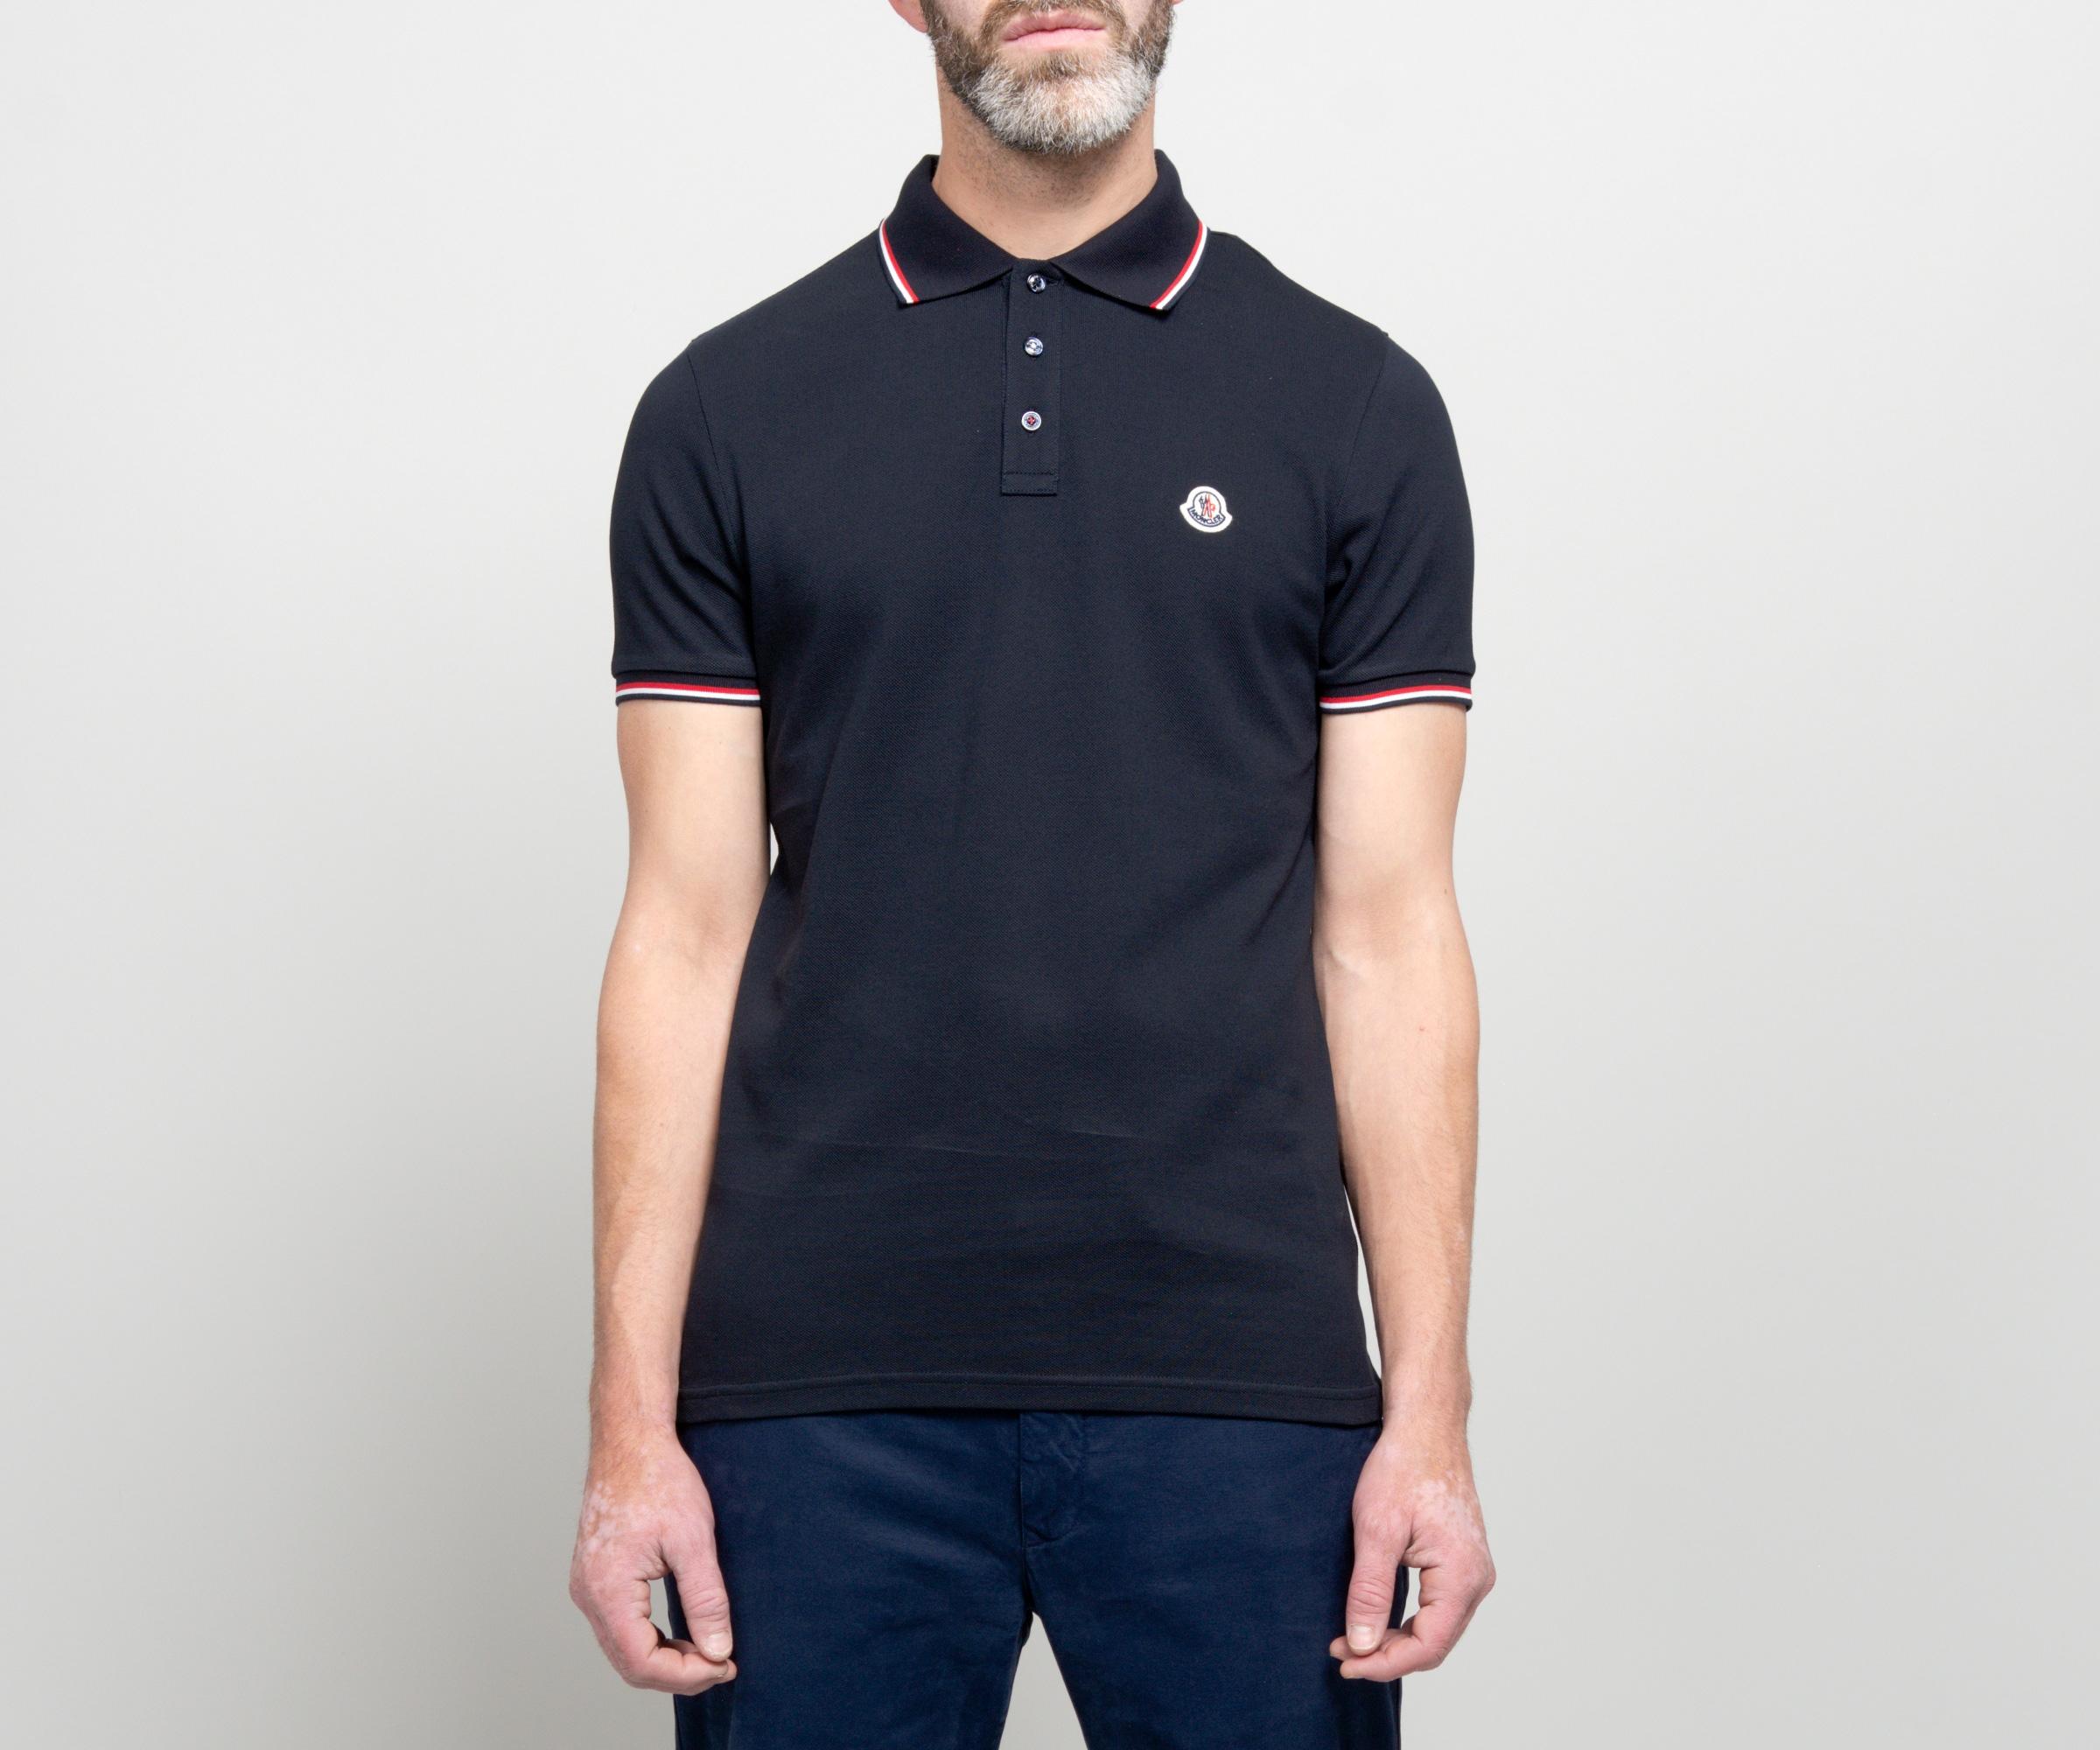 Moncler Slim Fit Polo Navy in Blue for Men - Lyst